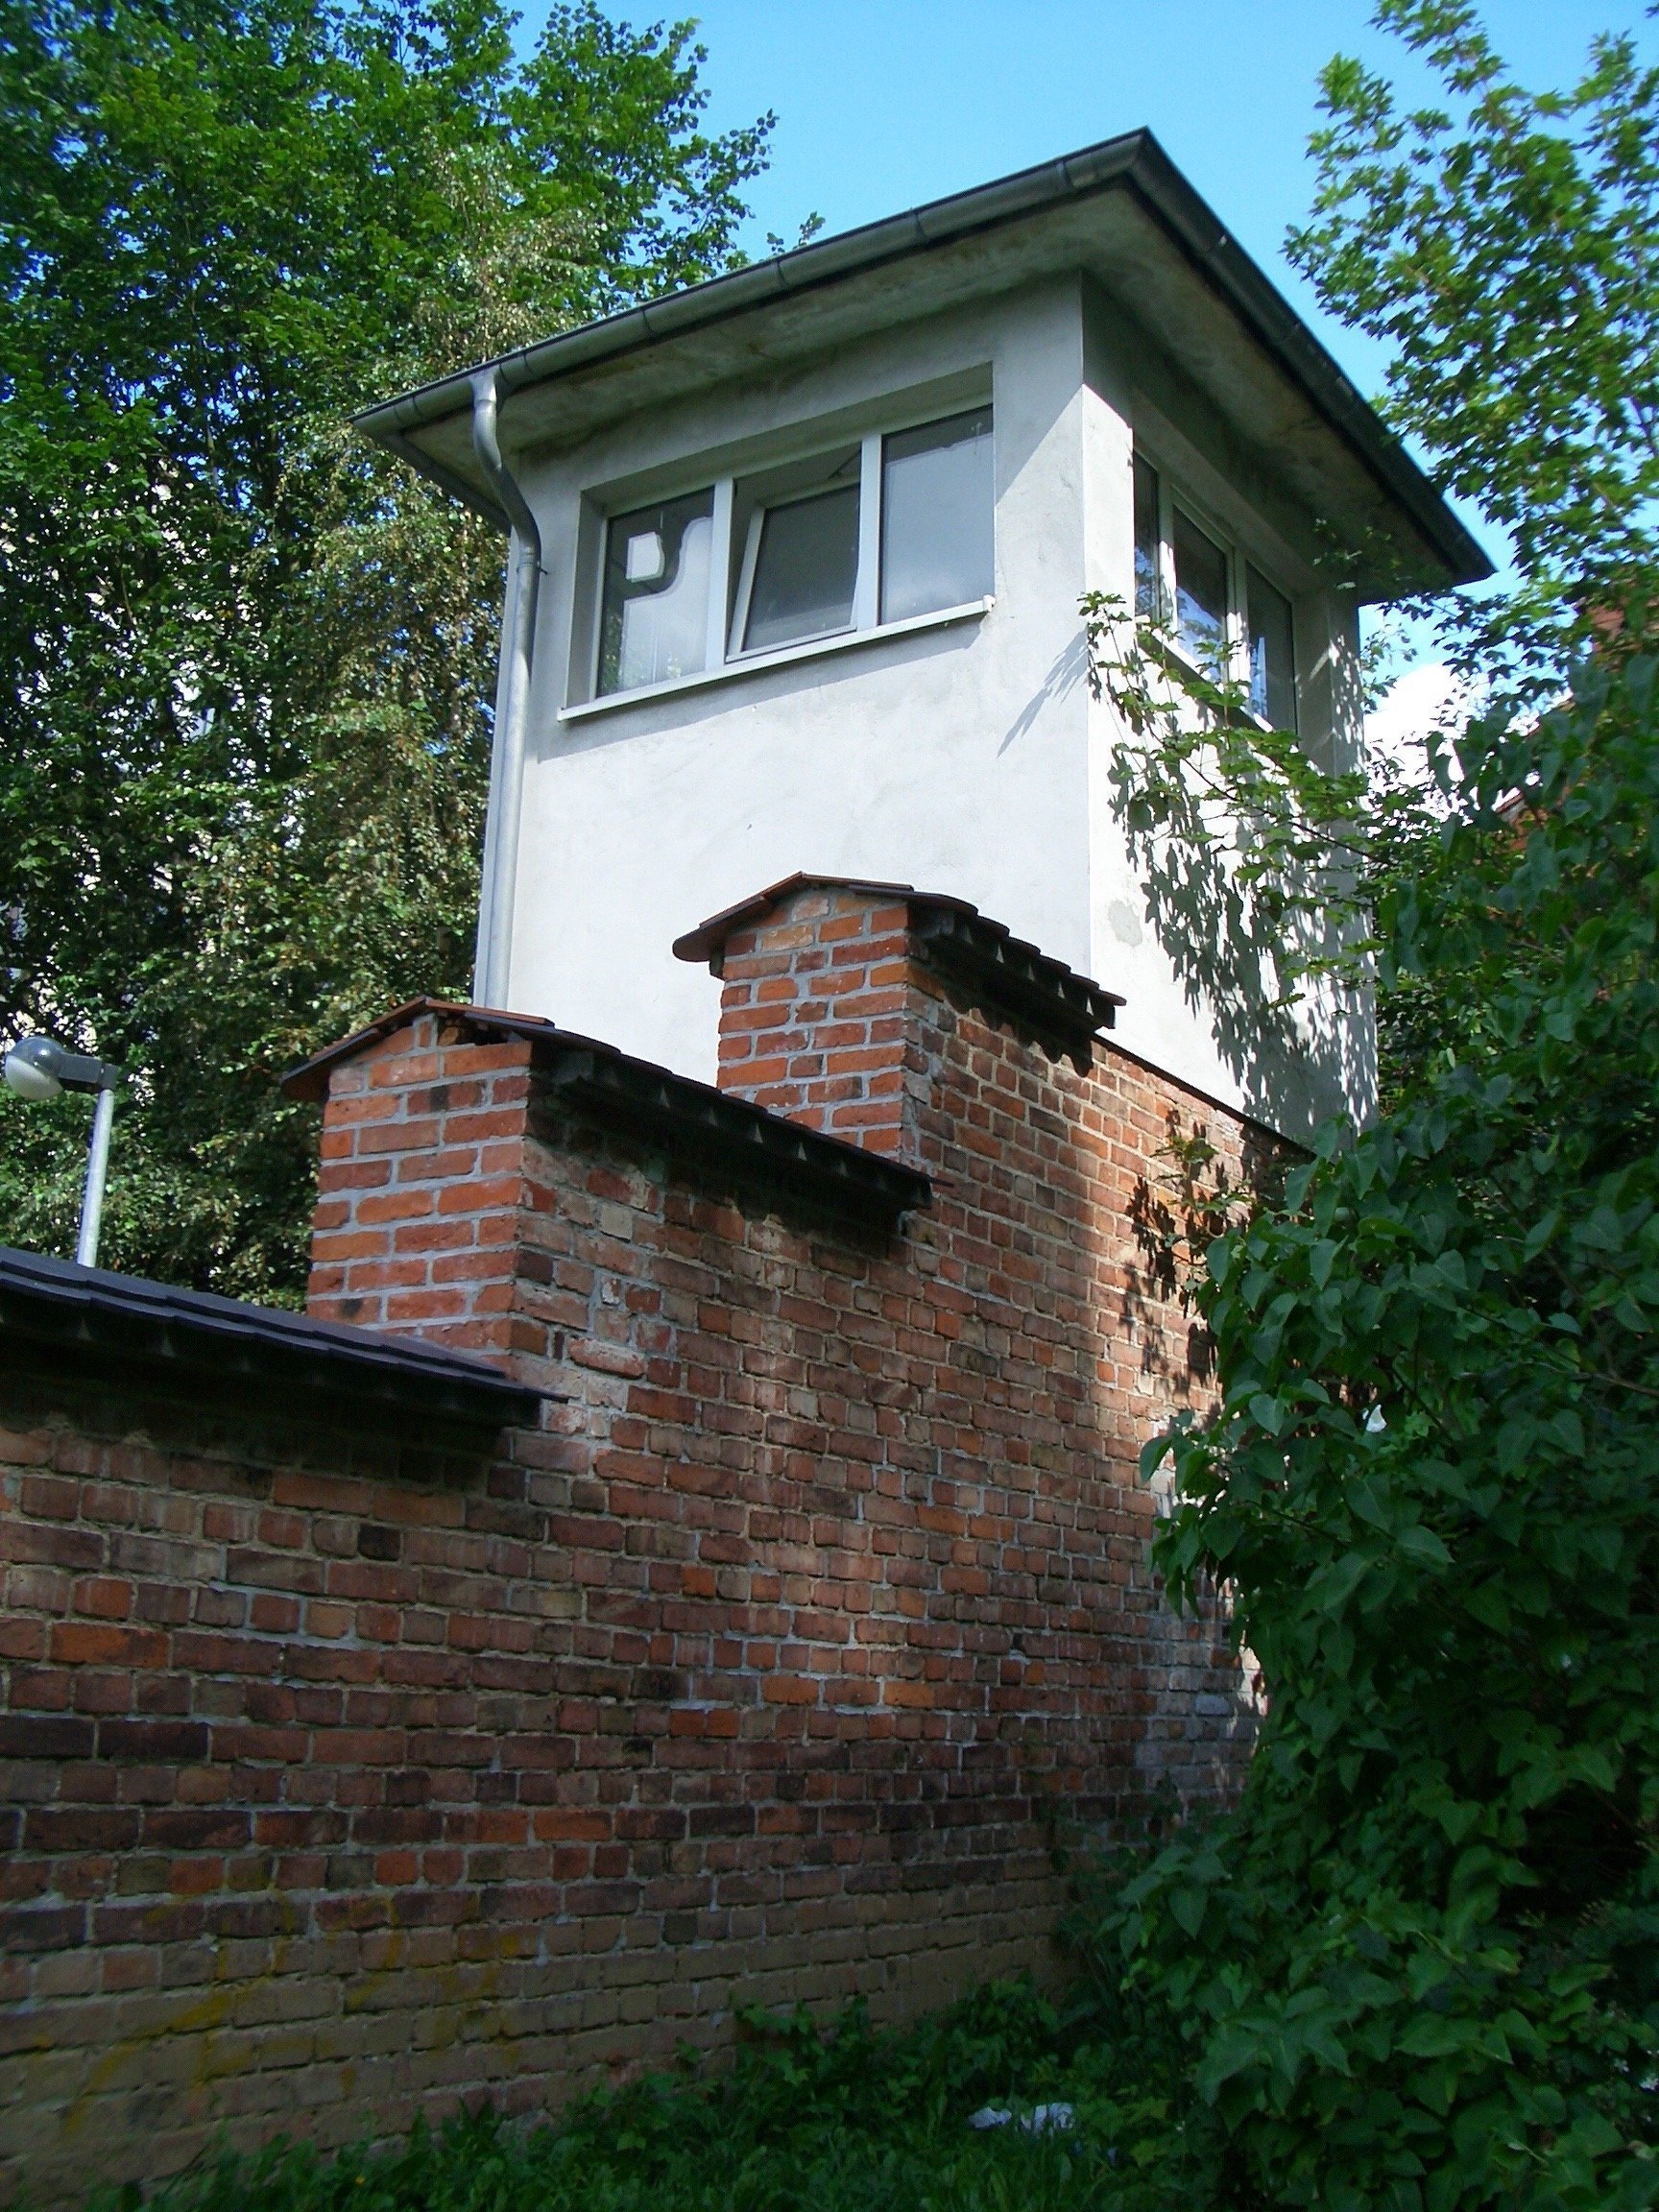 Authentic photo of a watchtower in the courtyard of the now demolished prison in Domstraße in Greifswald in 2004